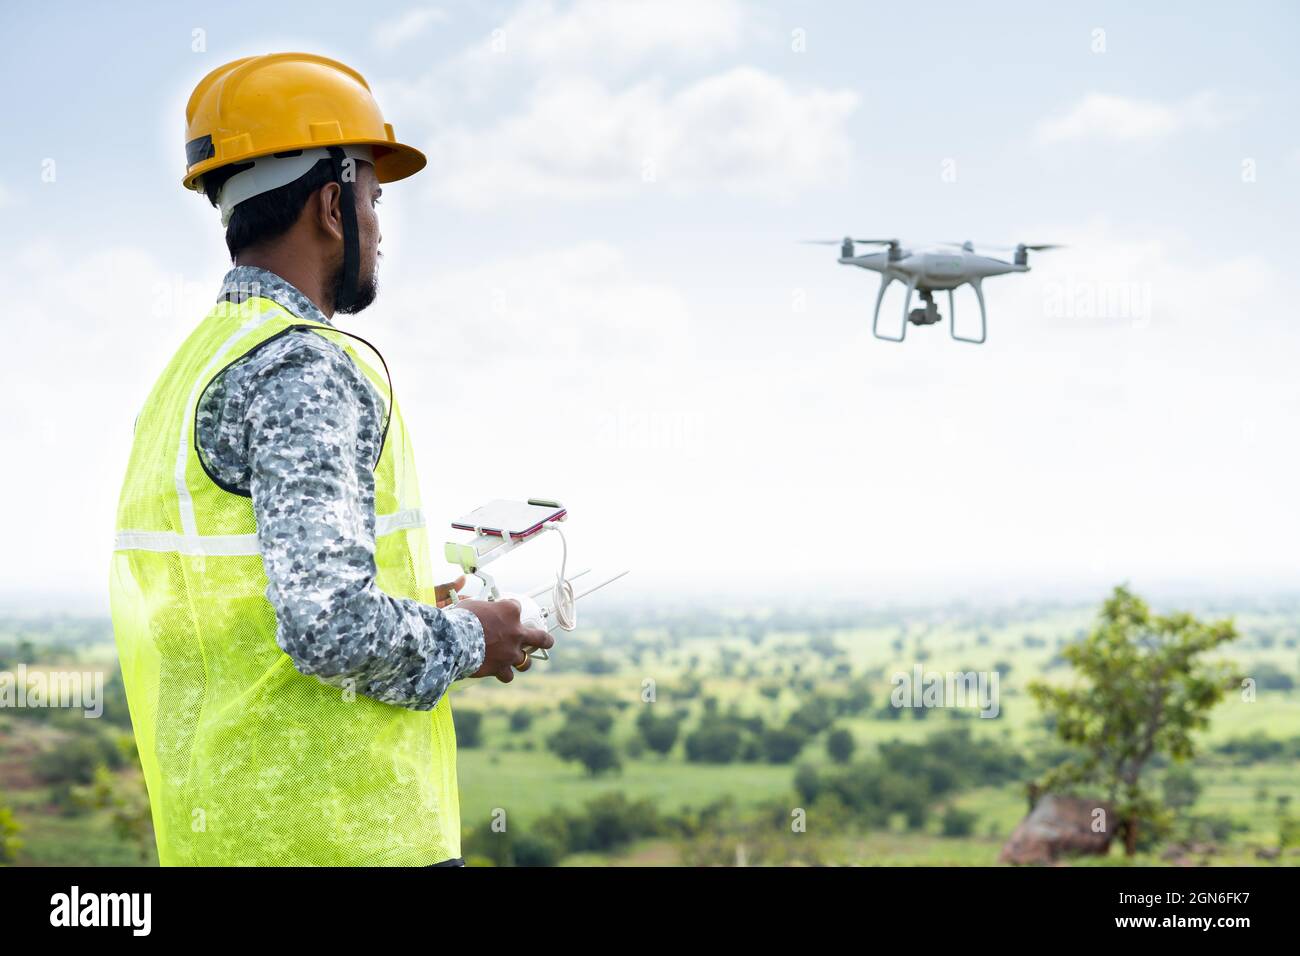 Focus on Pilot, Pilot with safety hardhat flying drone using remote  controller - Concept of engineer doing aerial survey or inspection using UAV  Stock Photo - Alamy